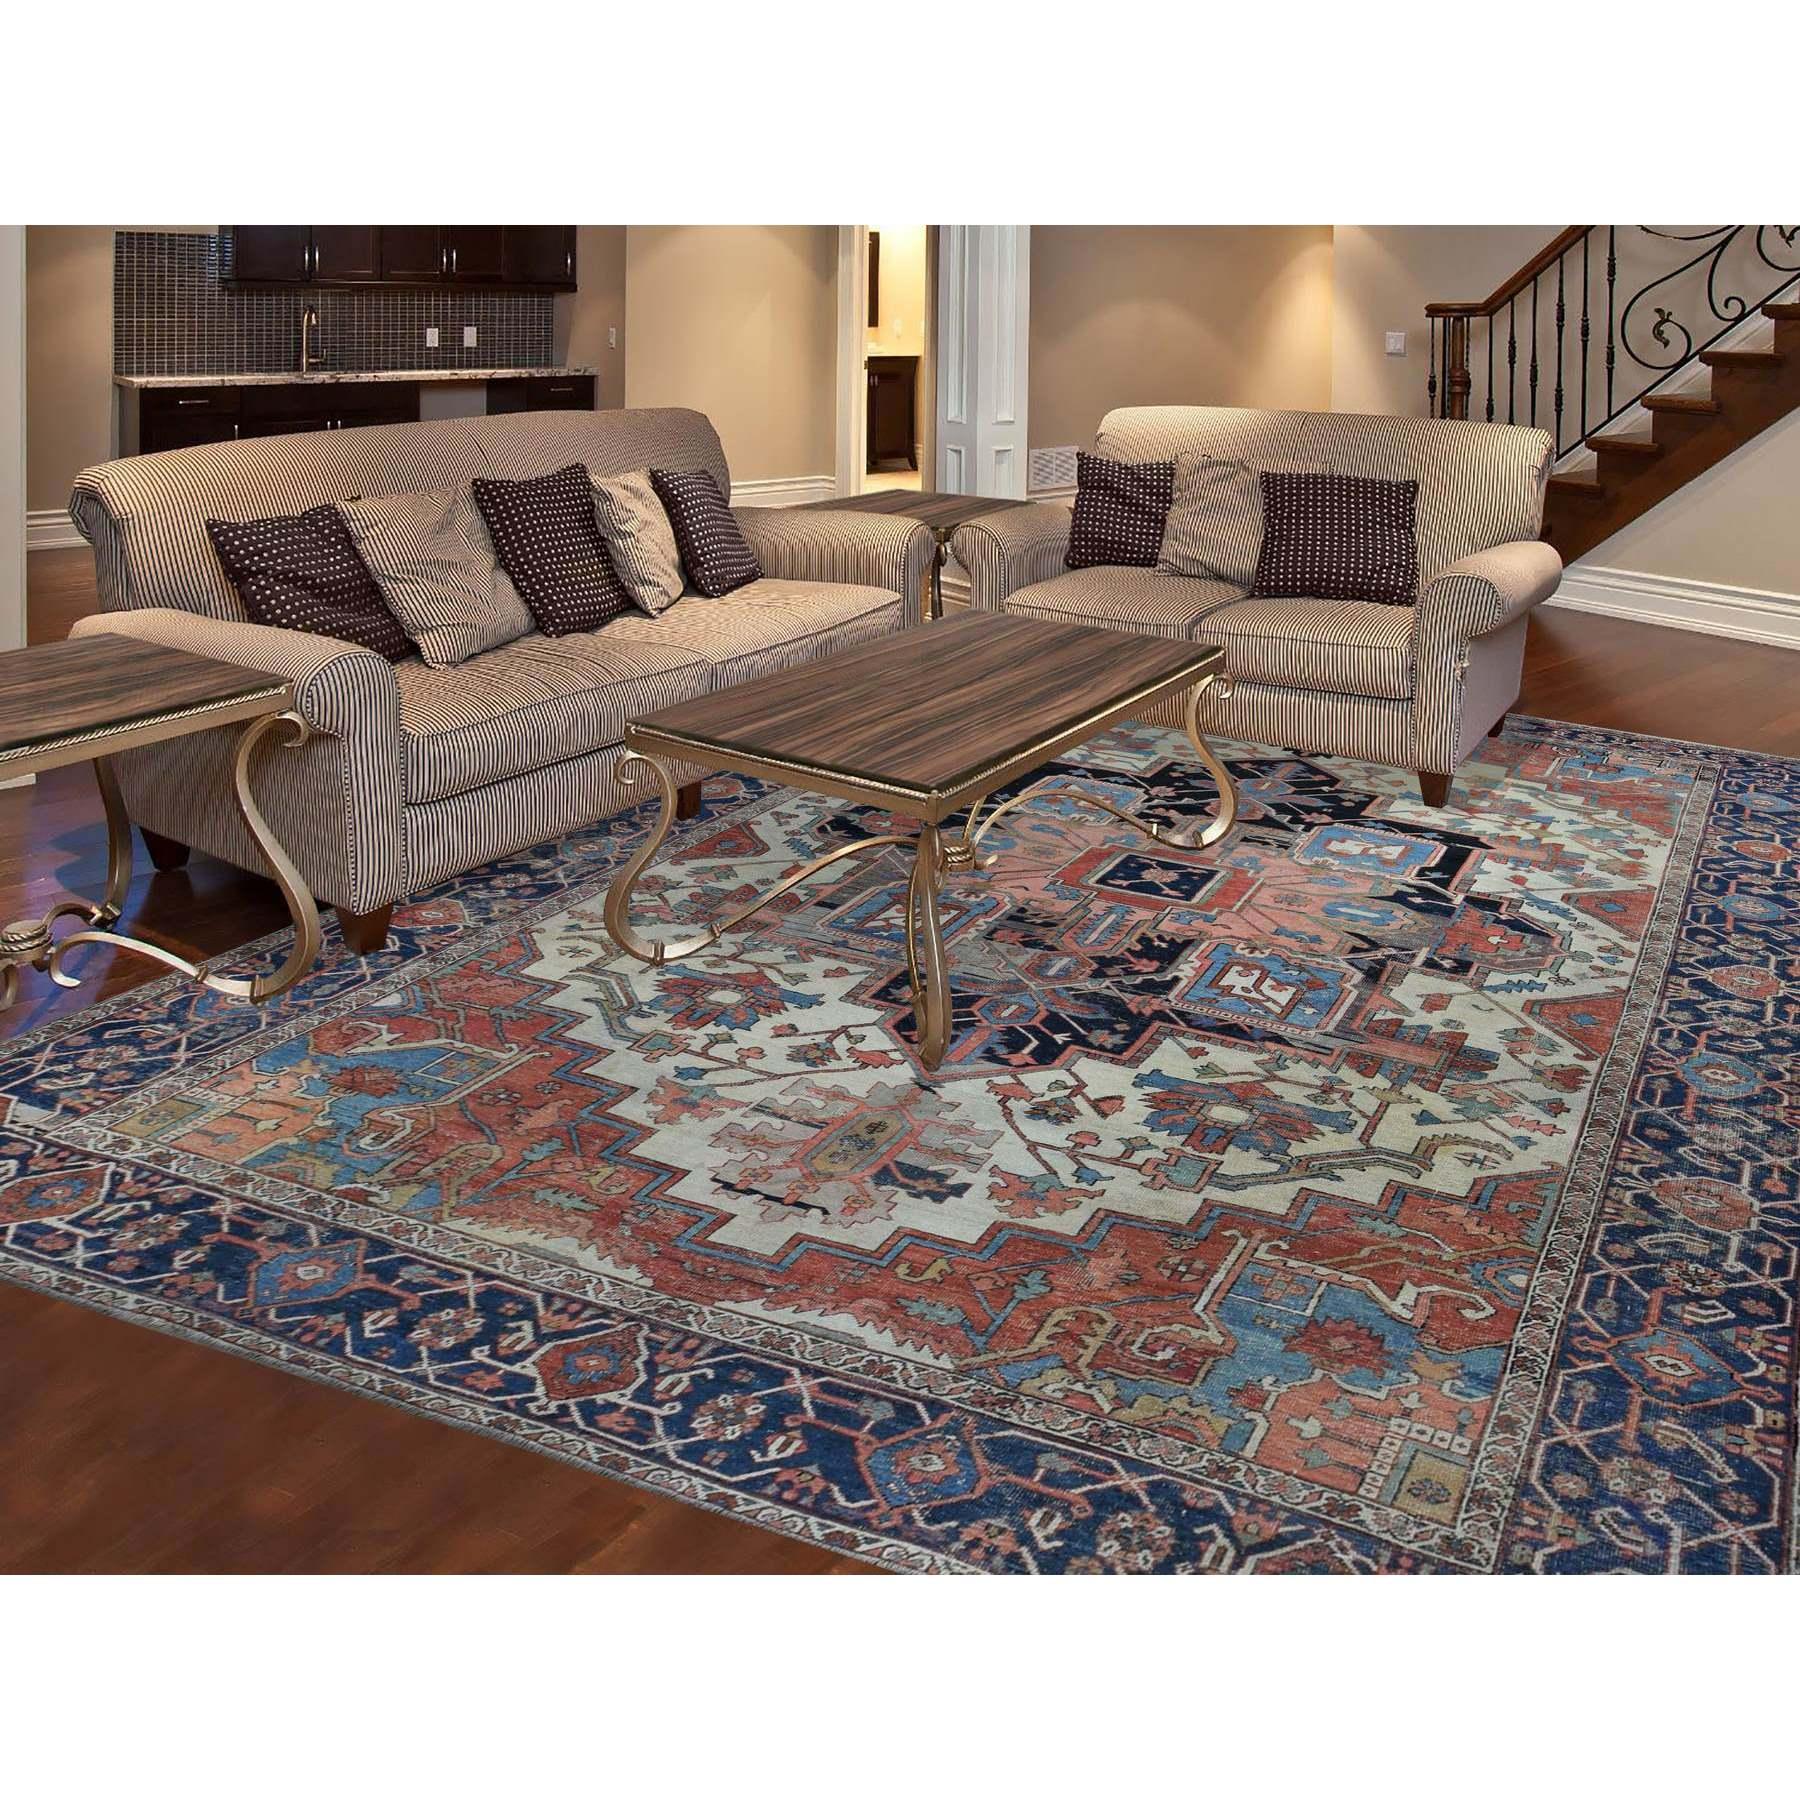 This fabulous Hand-Knotted carpet has been created and designed for extra strength and durability. This rug has been handcrafted for weeks in the traditional method that is used to make
Exact Rug Size in Feet and Inches : 9'9